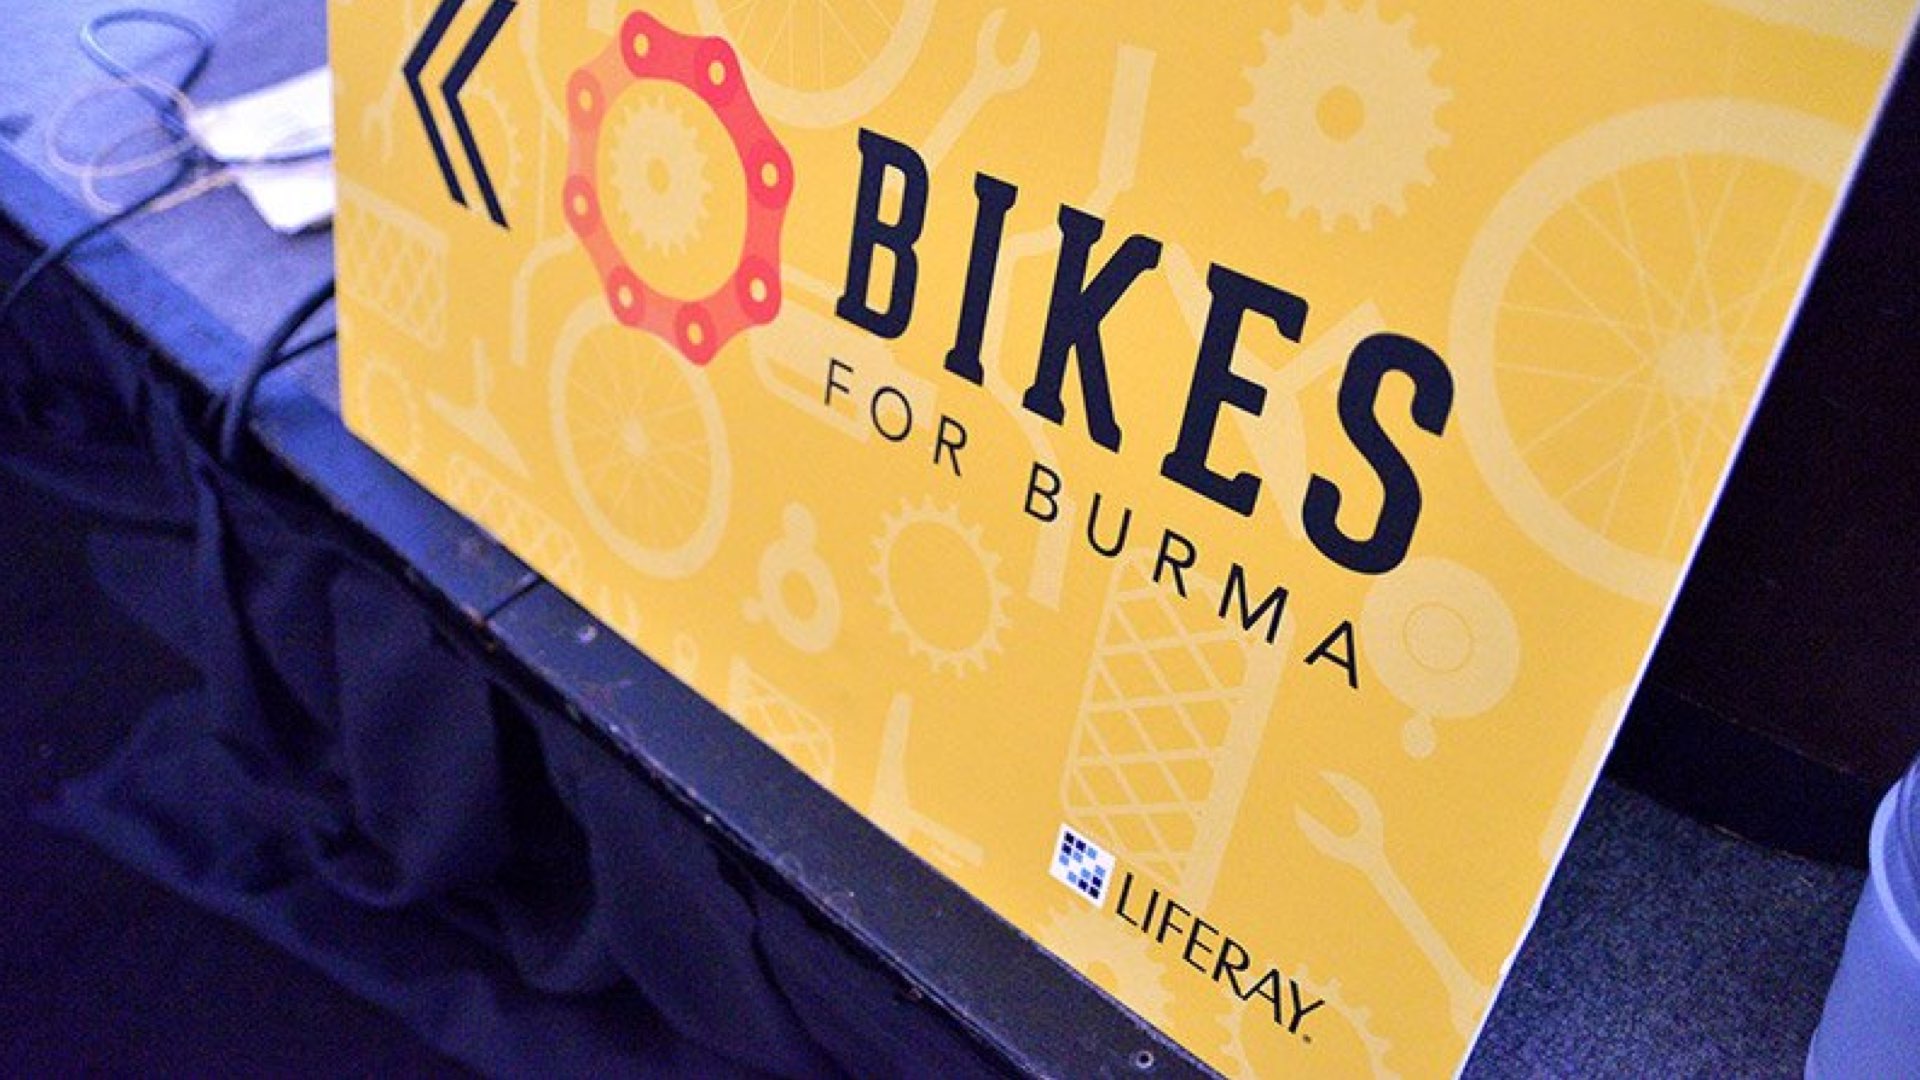 Picture from "Bikes for Burma" event